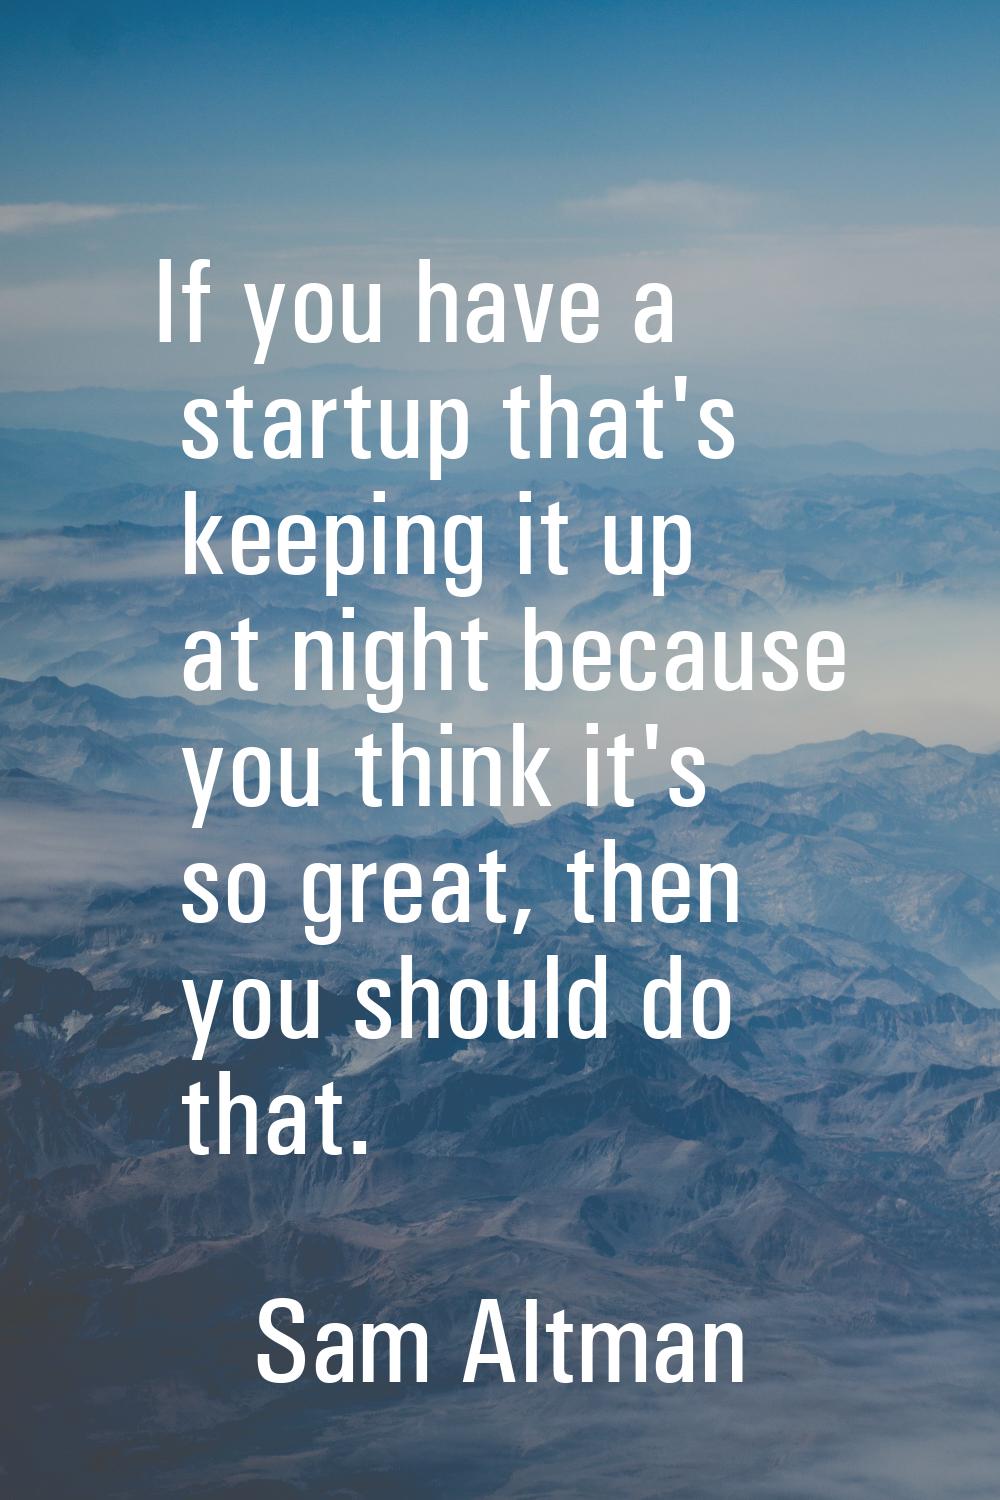 If you have a startup that's keeping it up at night because you think it's so great, then you shoul